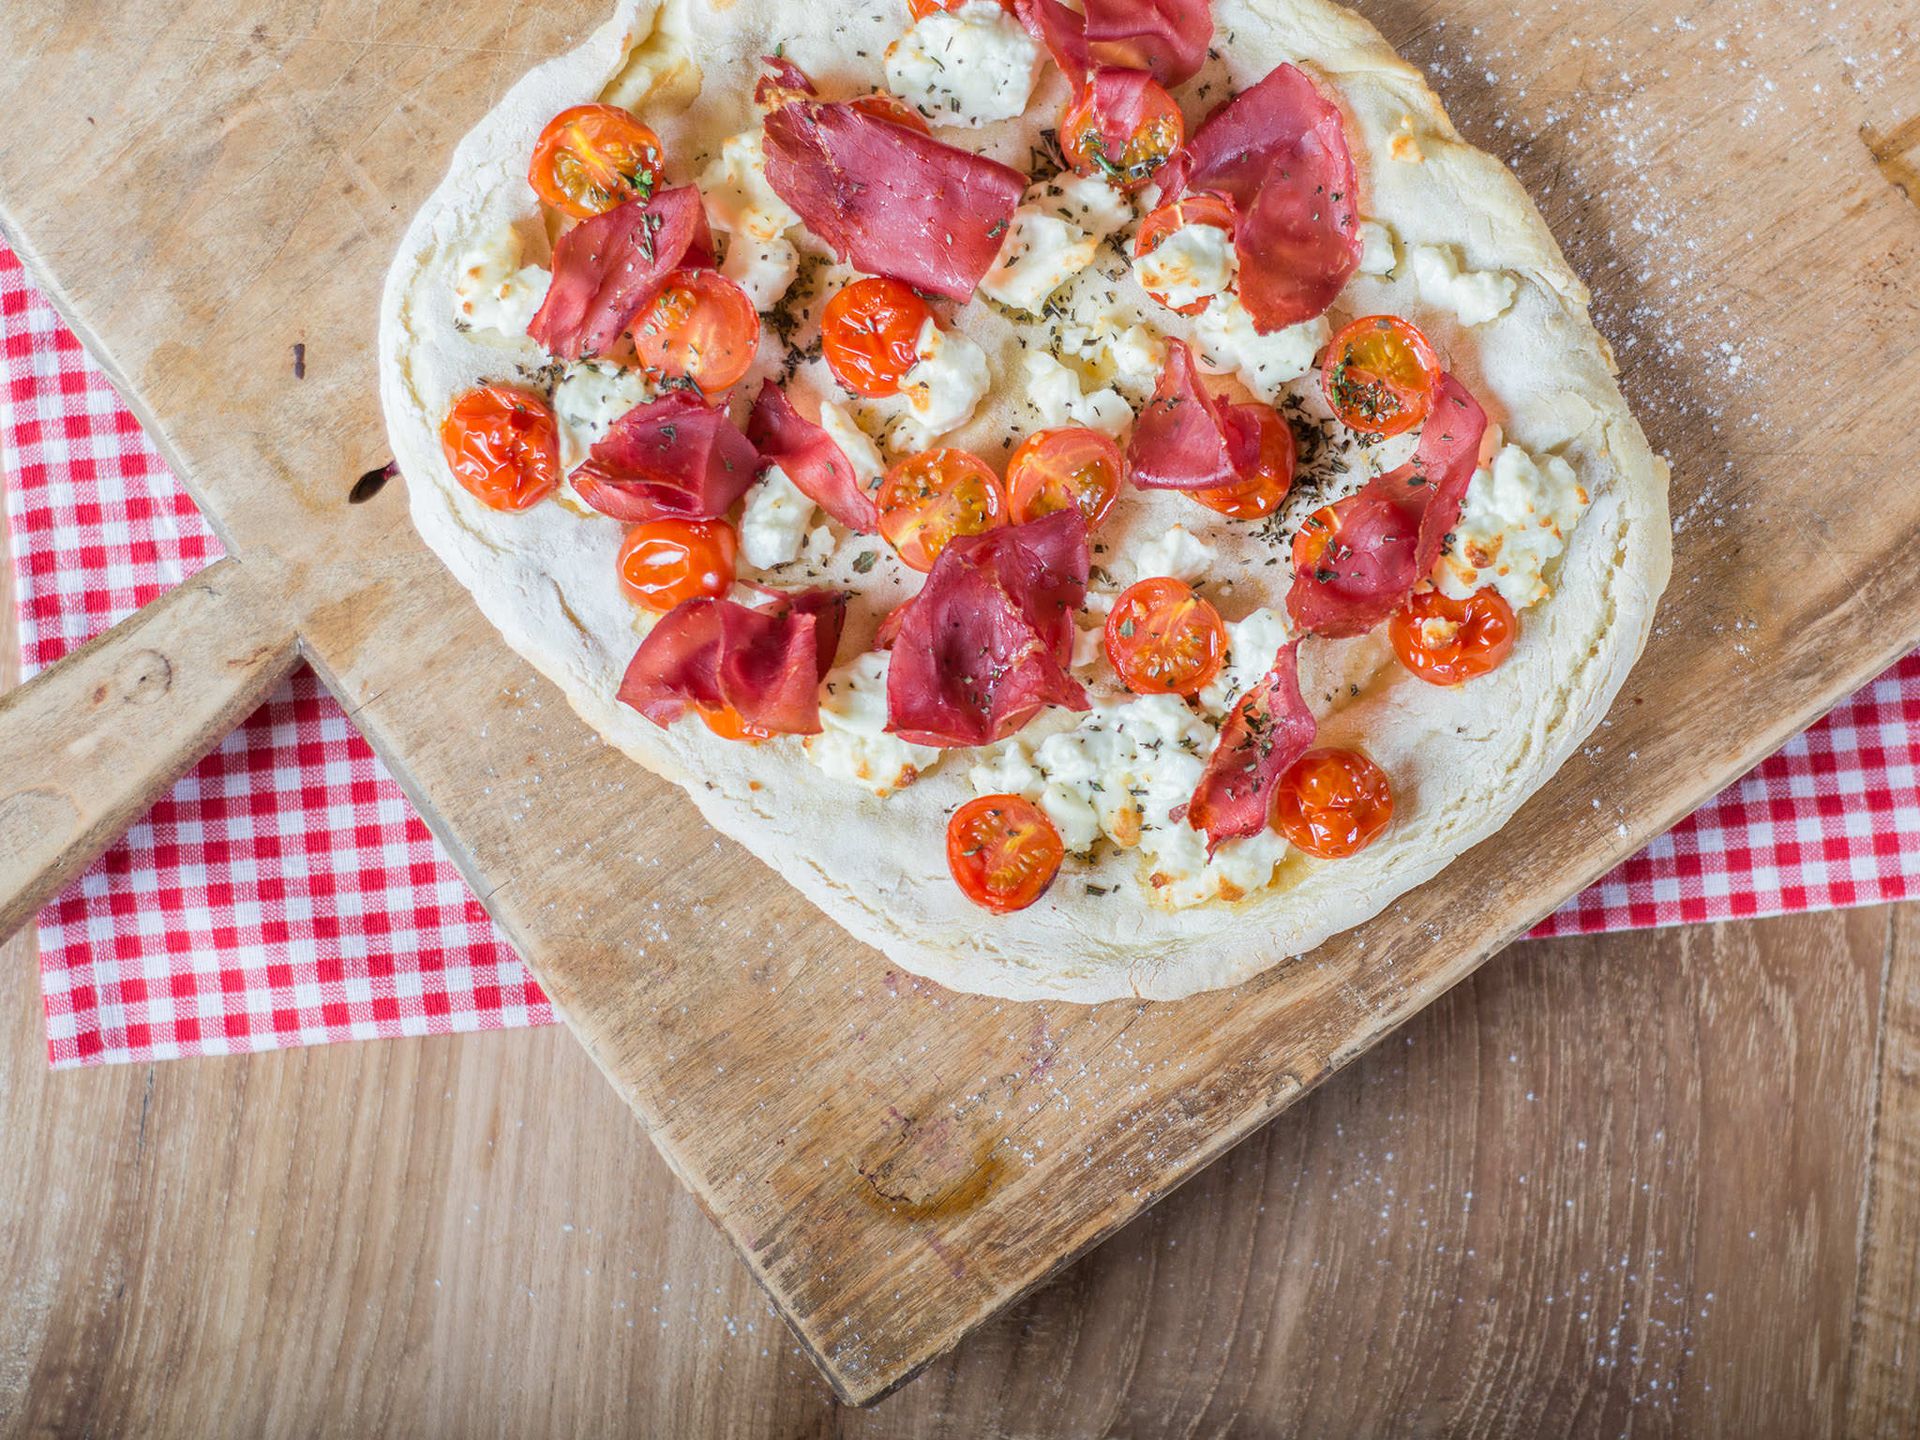 Grilled pizza with Bresaola